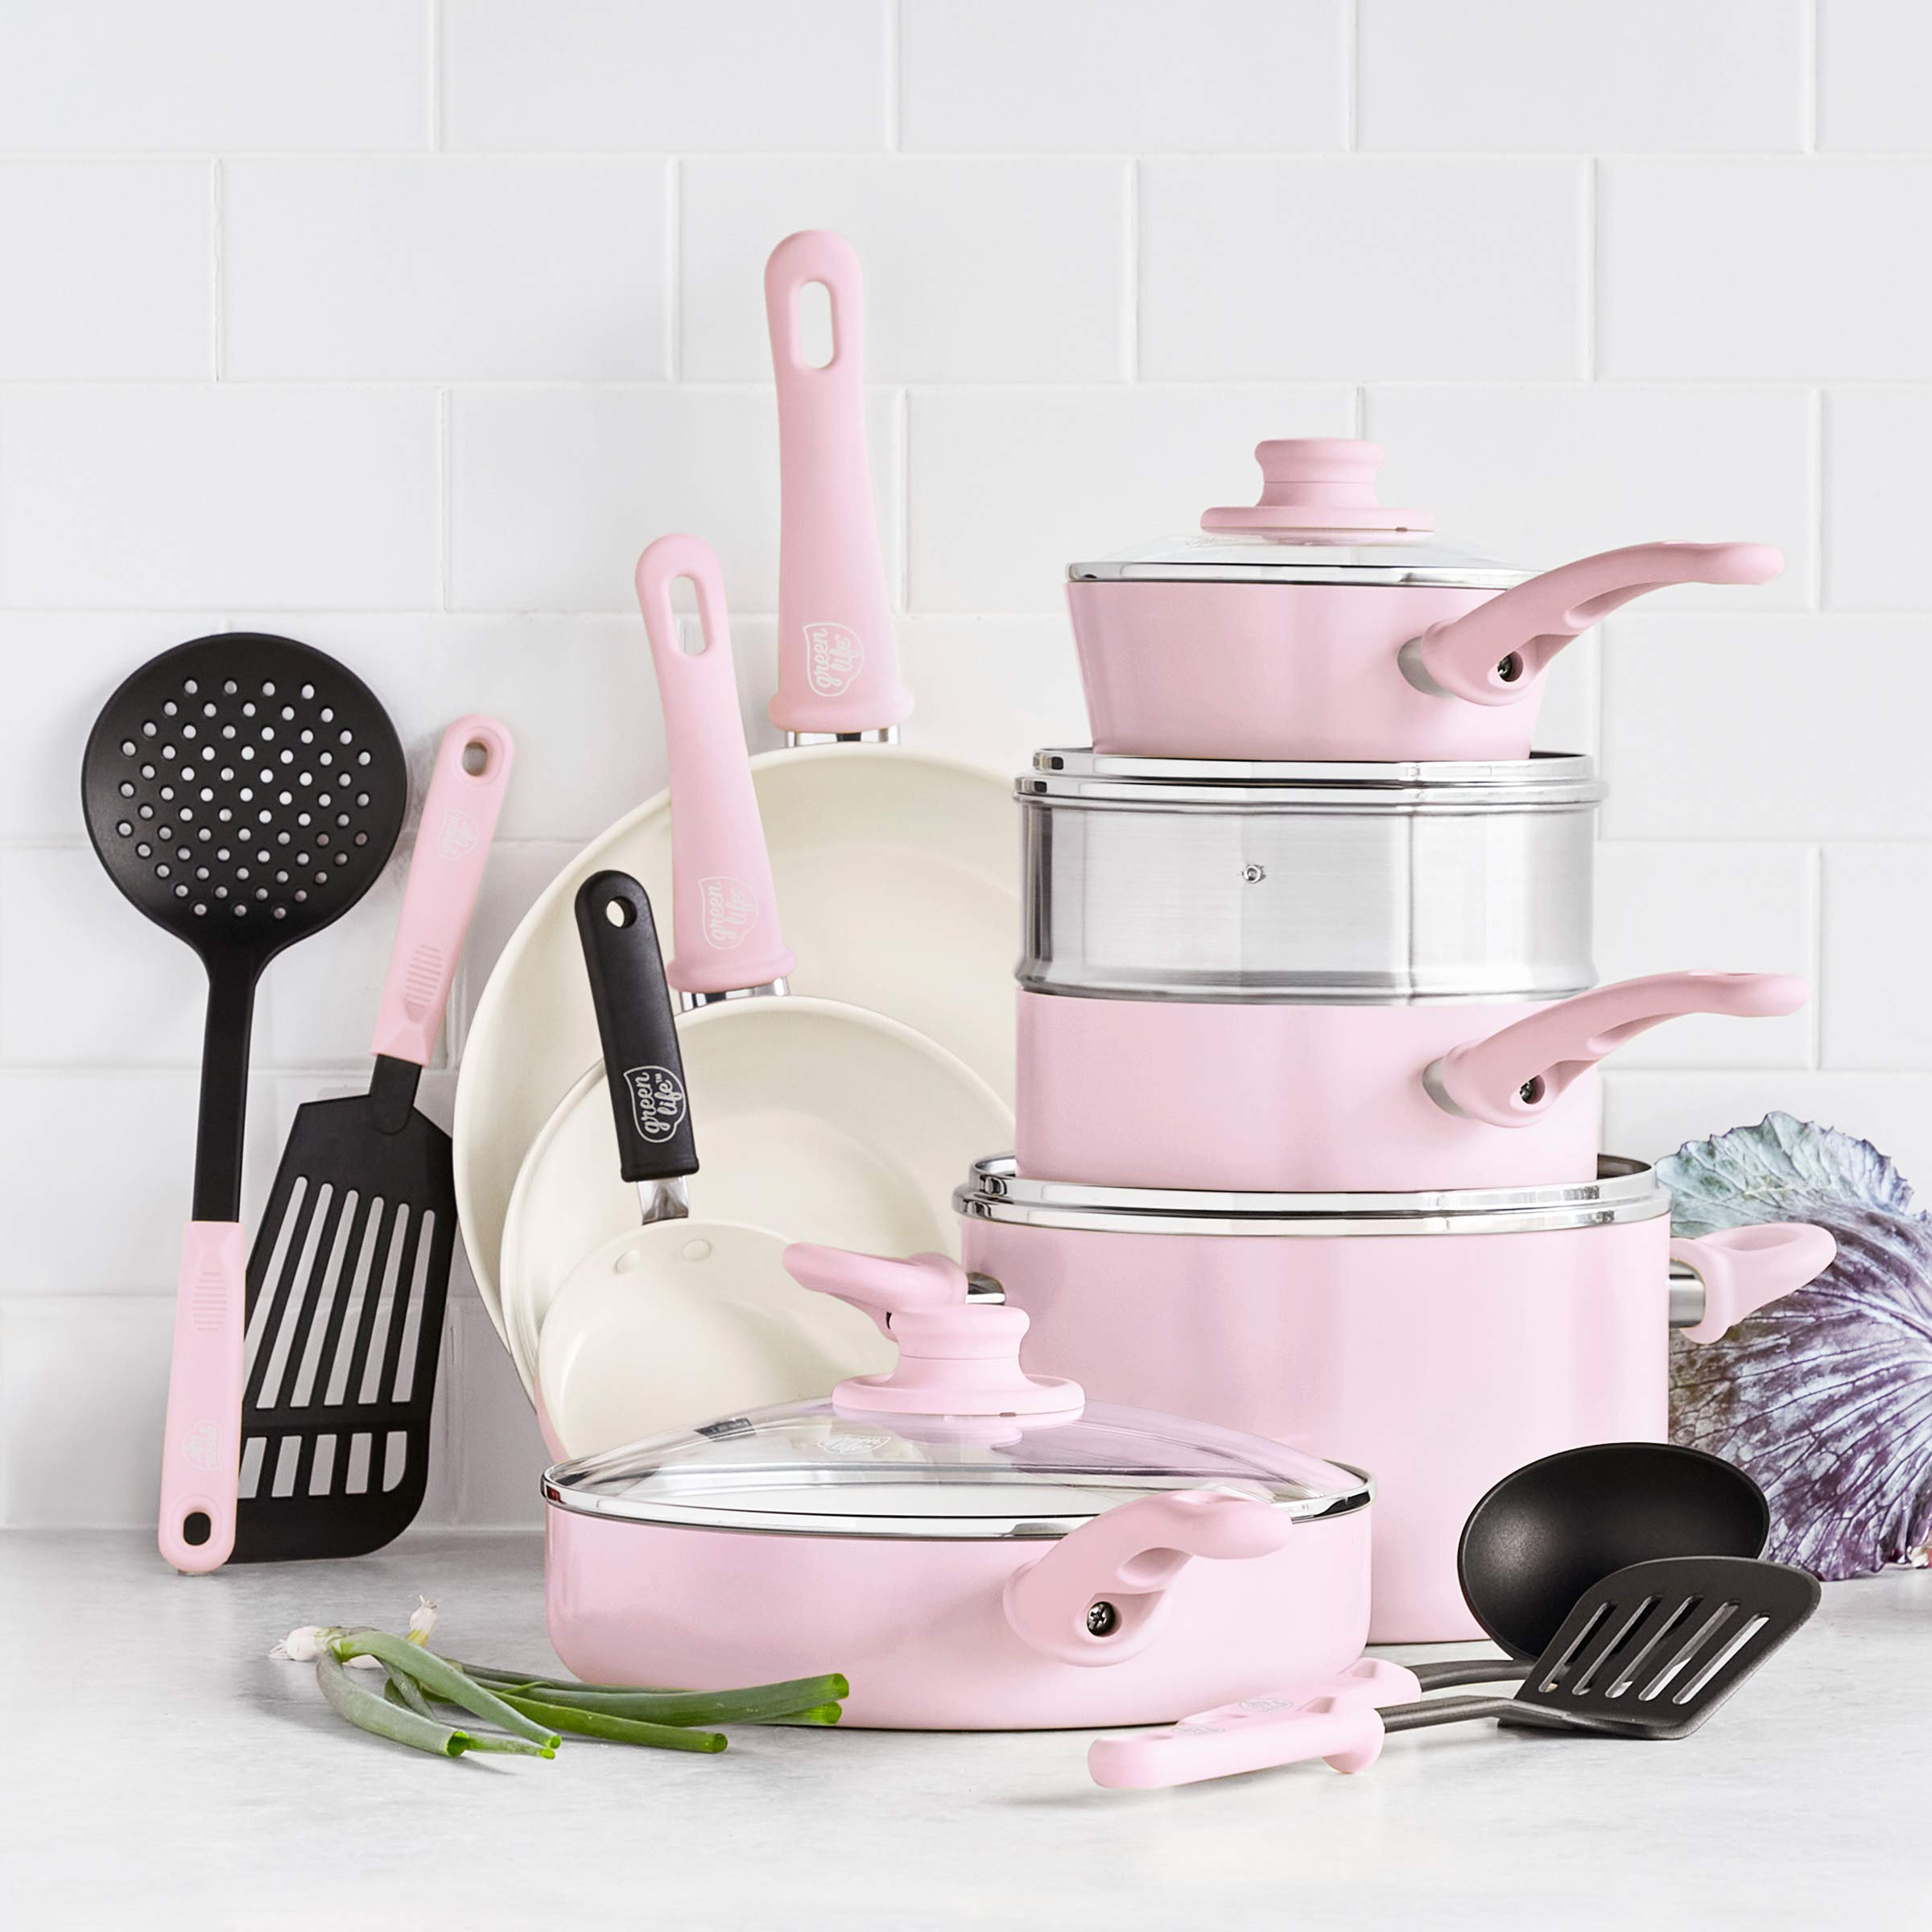 Healthy Non-Toxic Nonstick Cookware Sets - Soft Grip 23-Piece Cookware Set in Pink - by GreenLife